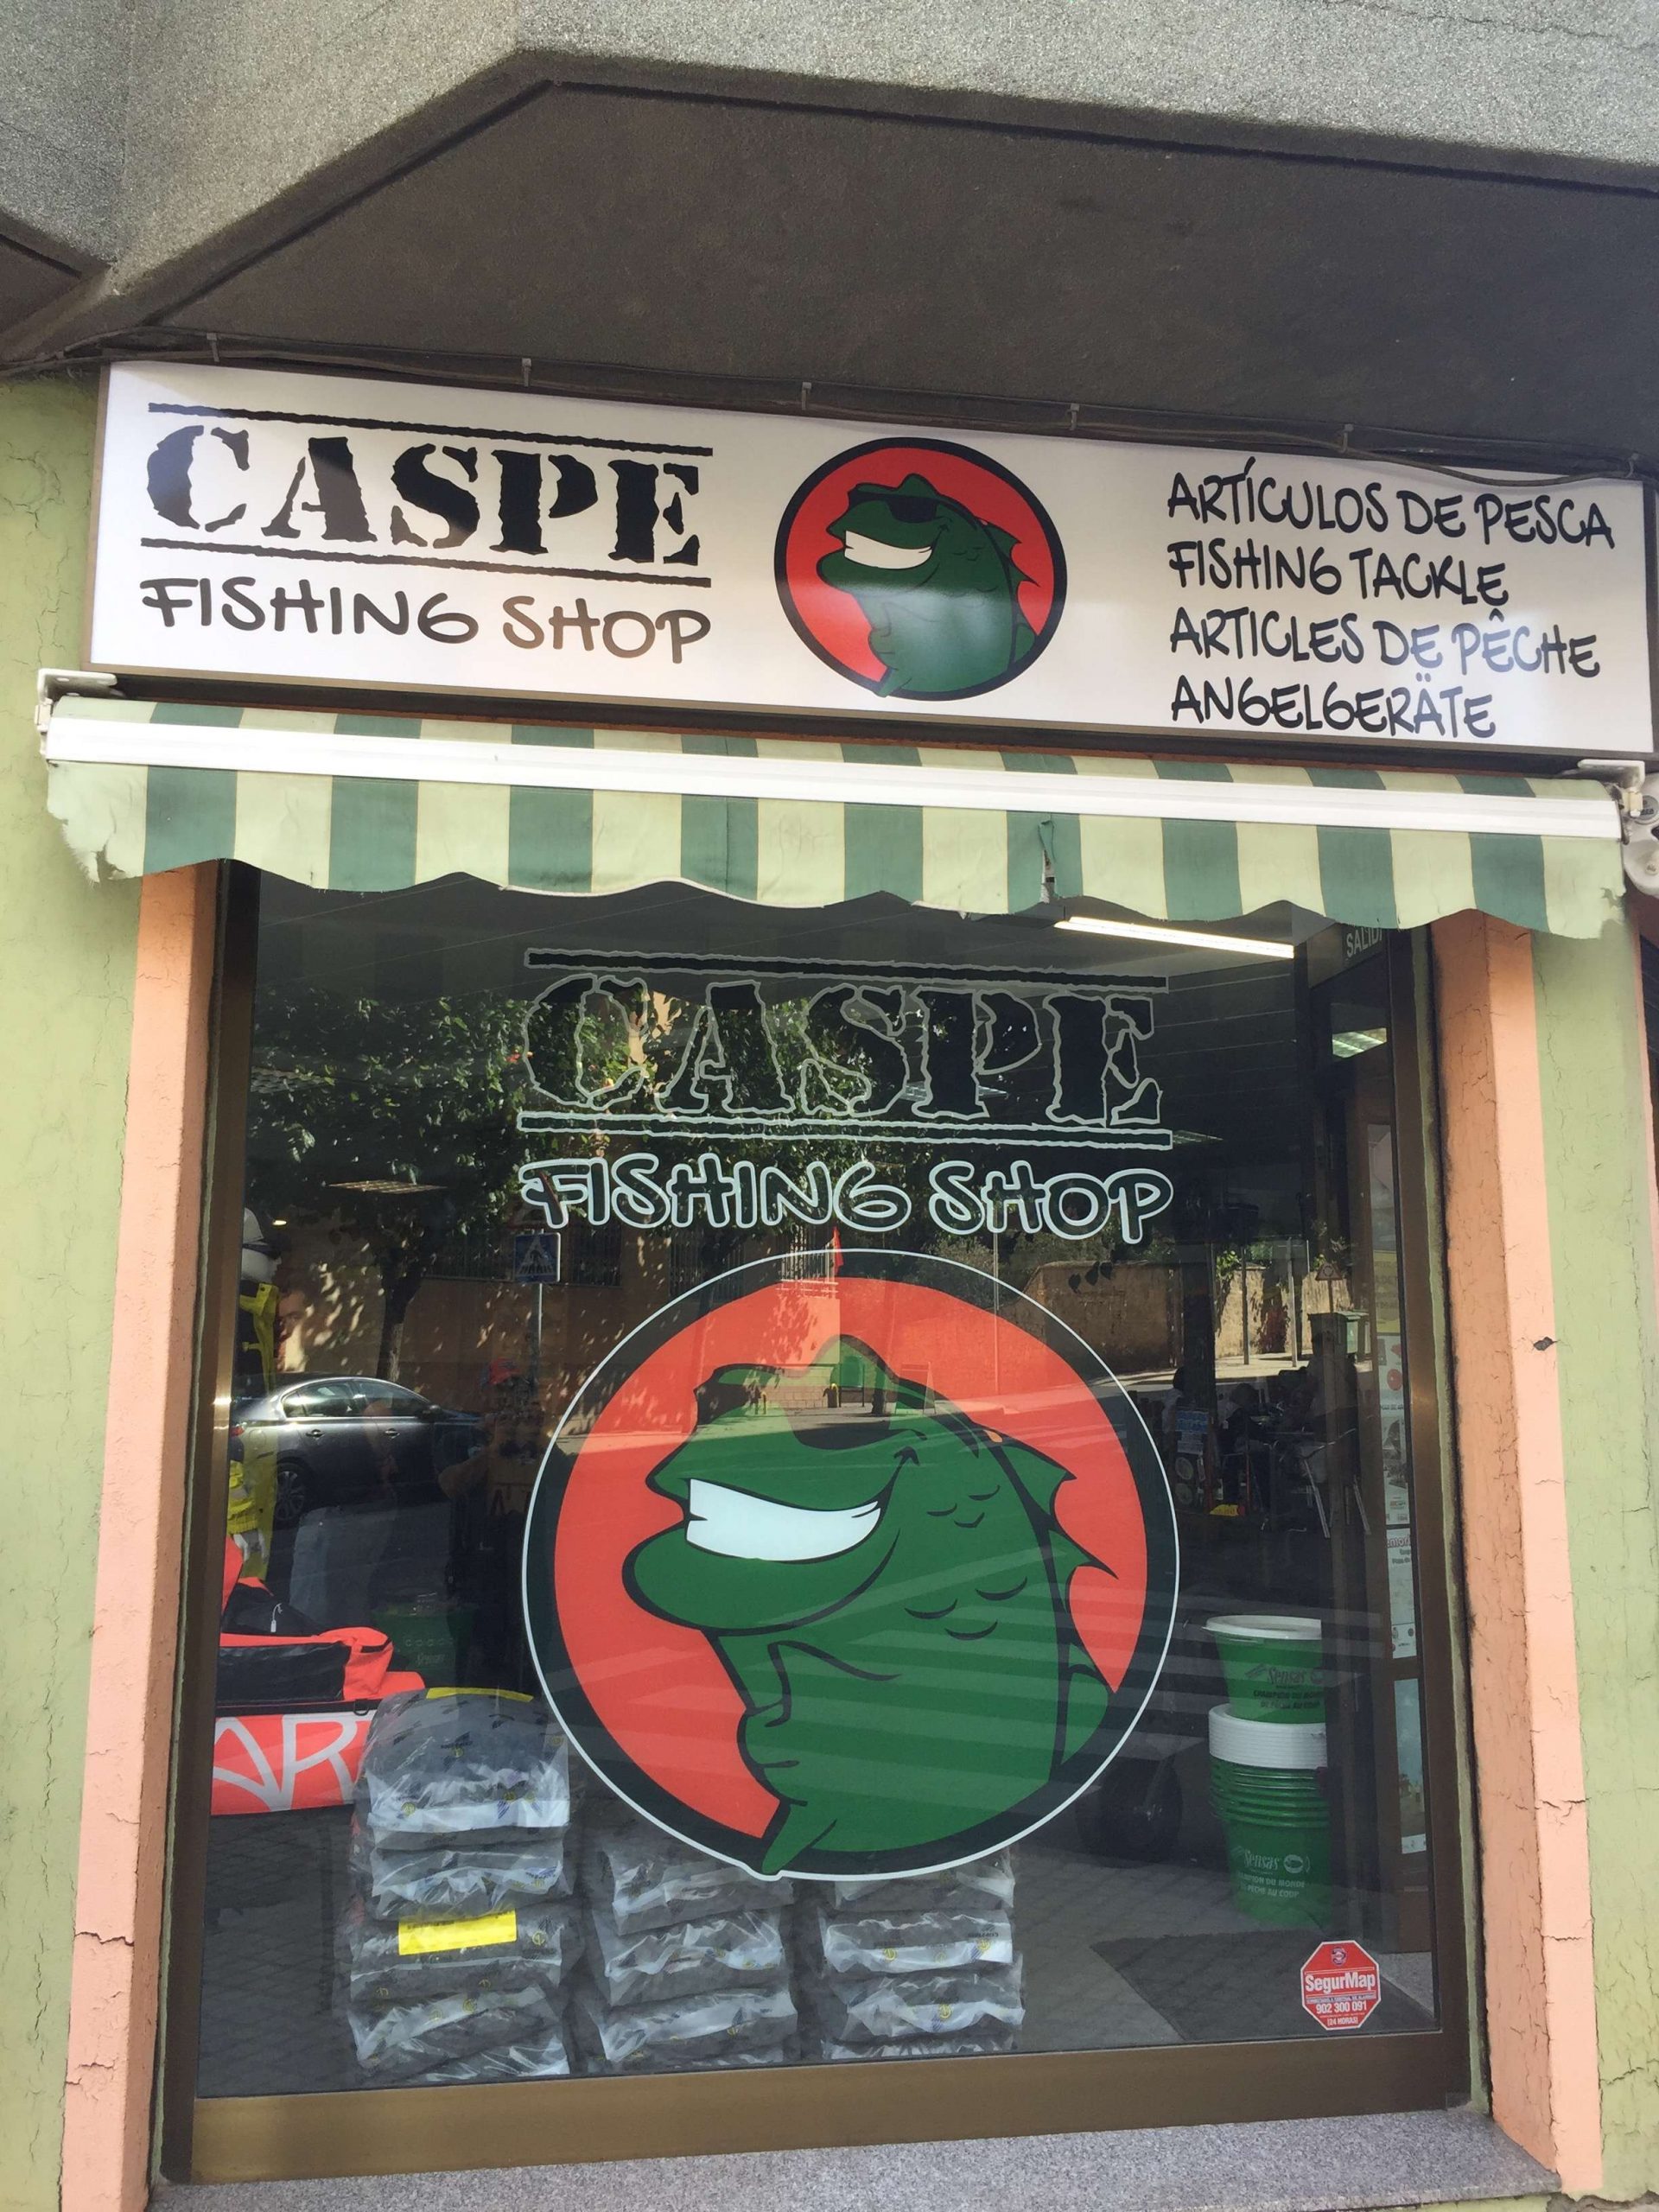 The Caspe Fishing Shop is located in Caspe, Spain, adjacent to Lake Caspe, venue for the 25th Annual International Caspe Bass Fishing Tournament. It was impossible to walk past without taking a peek inside.